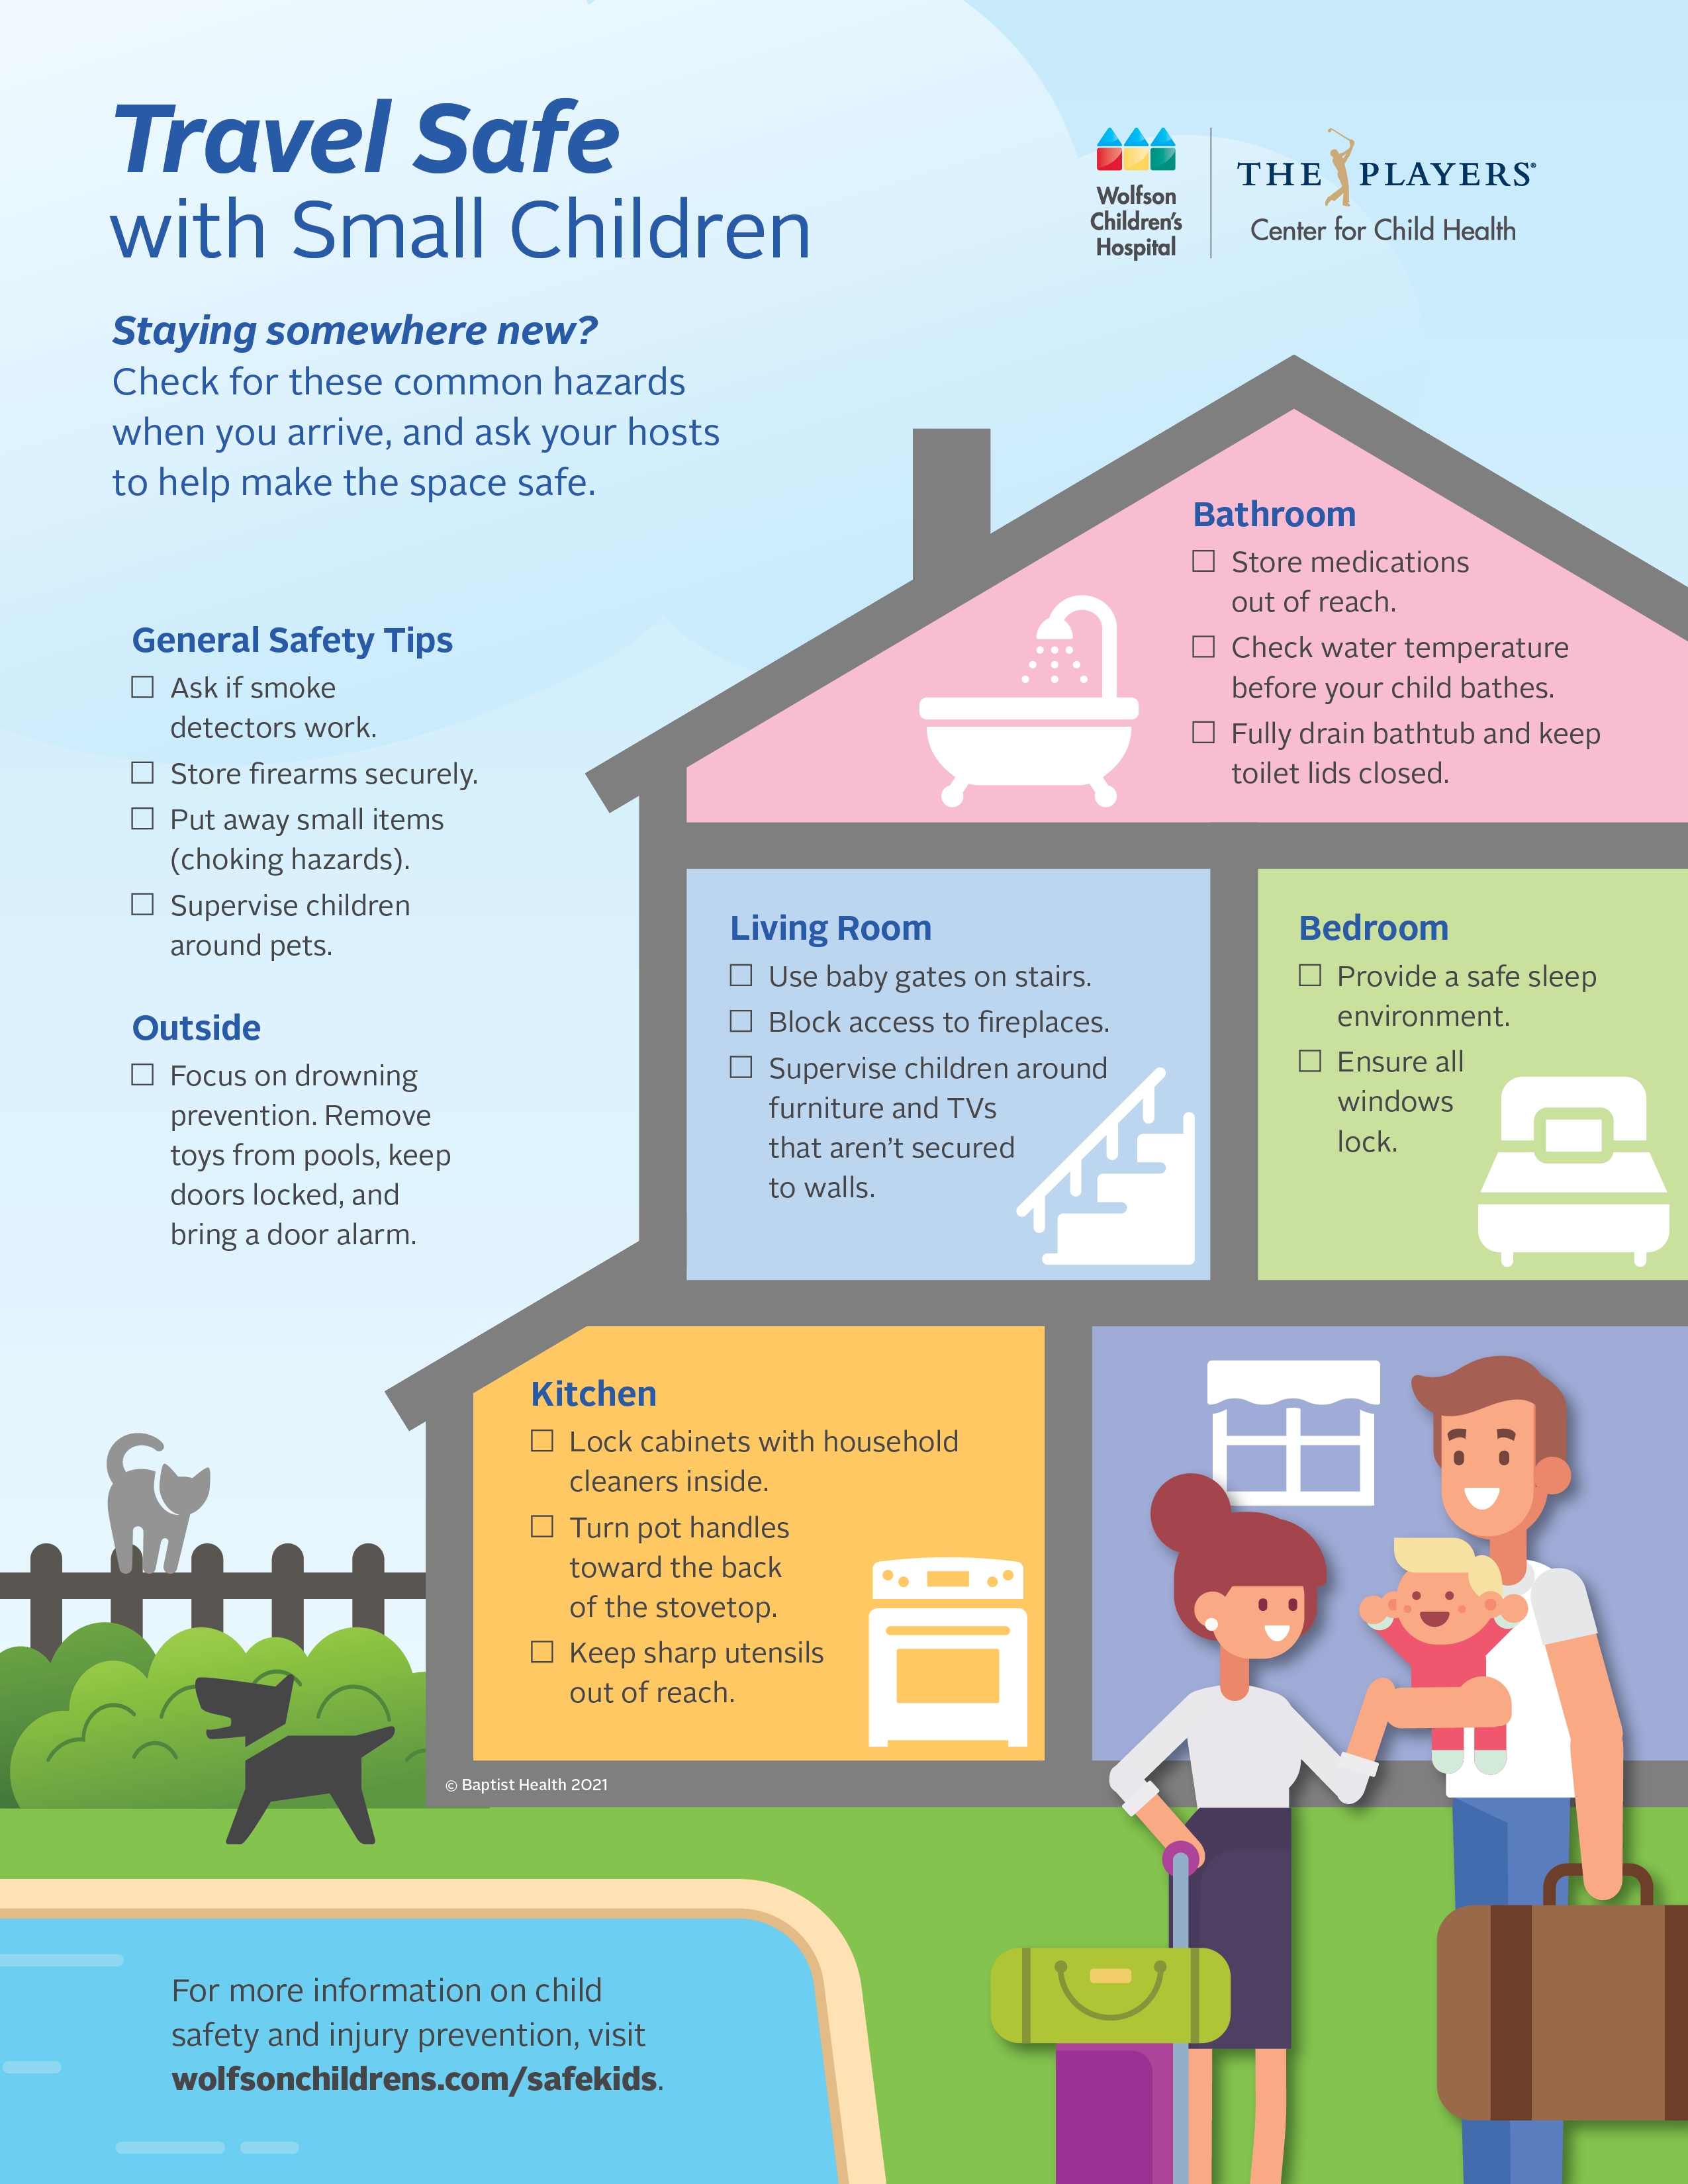 Travel Safe with Small Children infographic